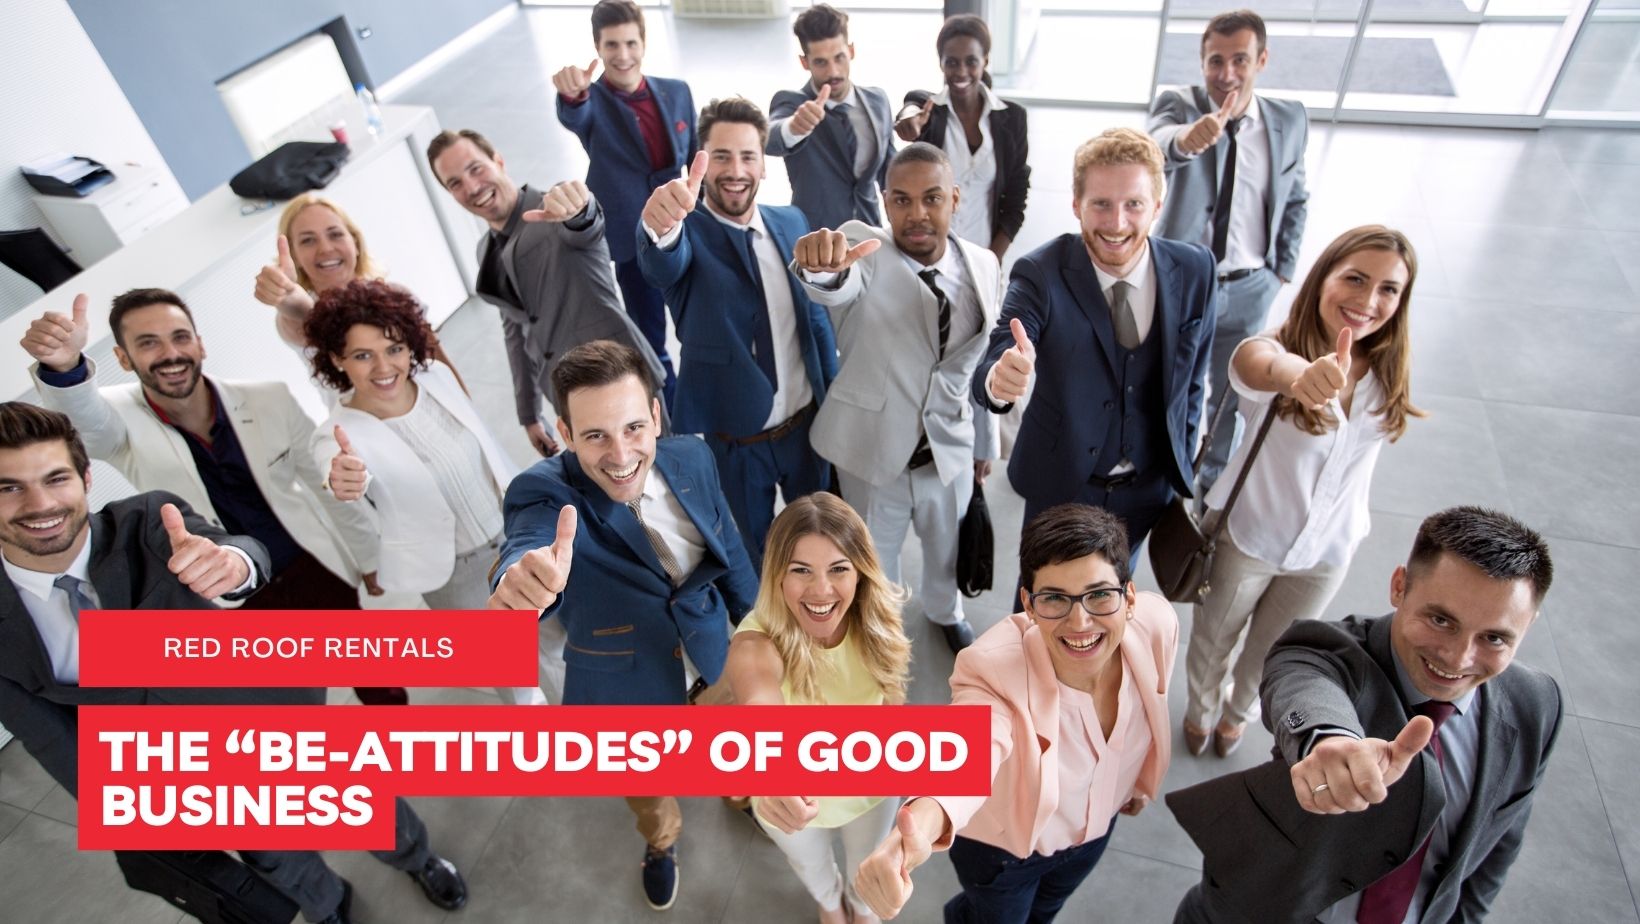 THE “BE-ATTITUDES” OF GOOD BUSINESS